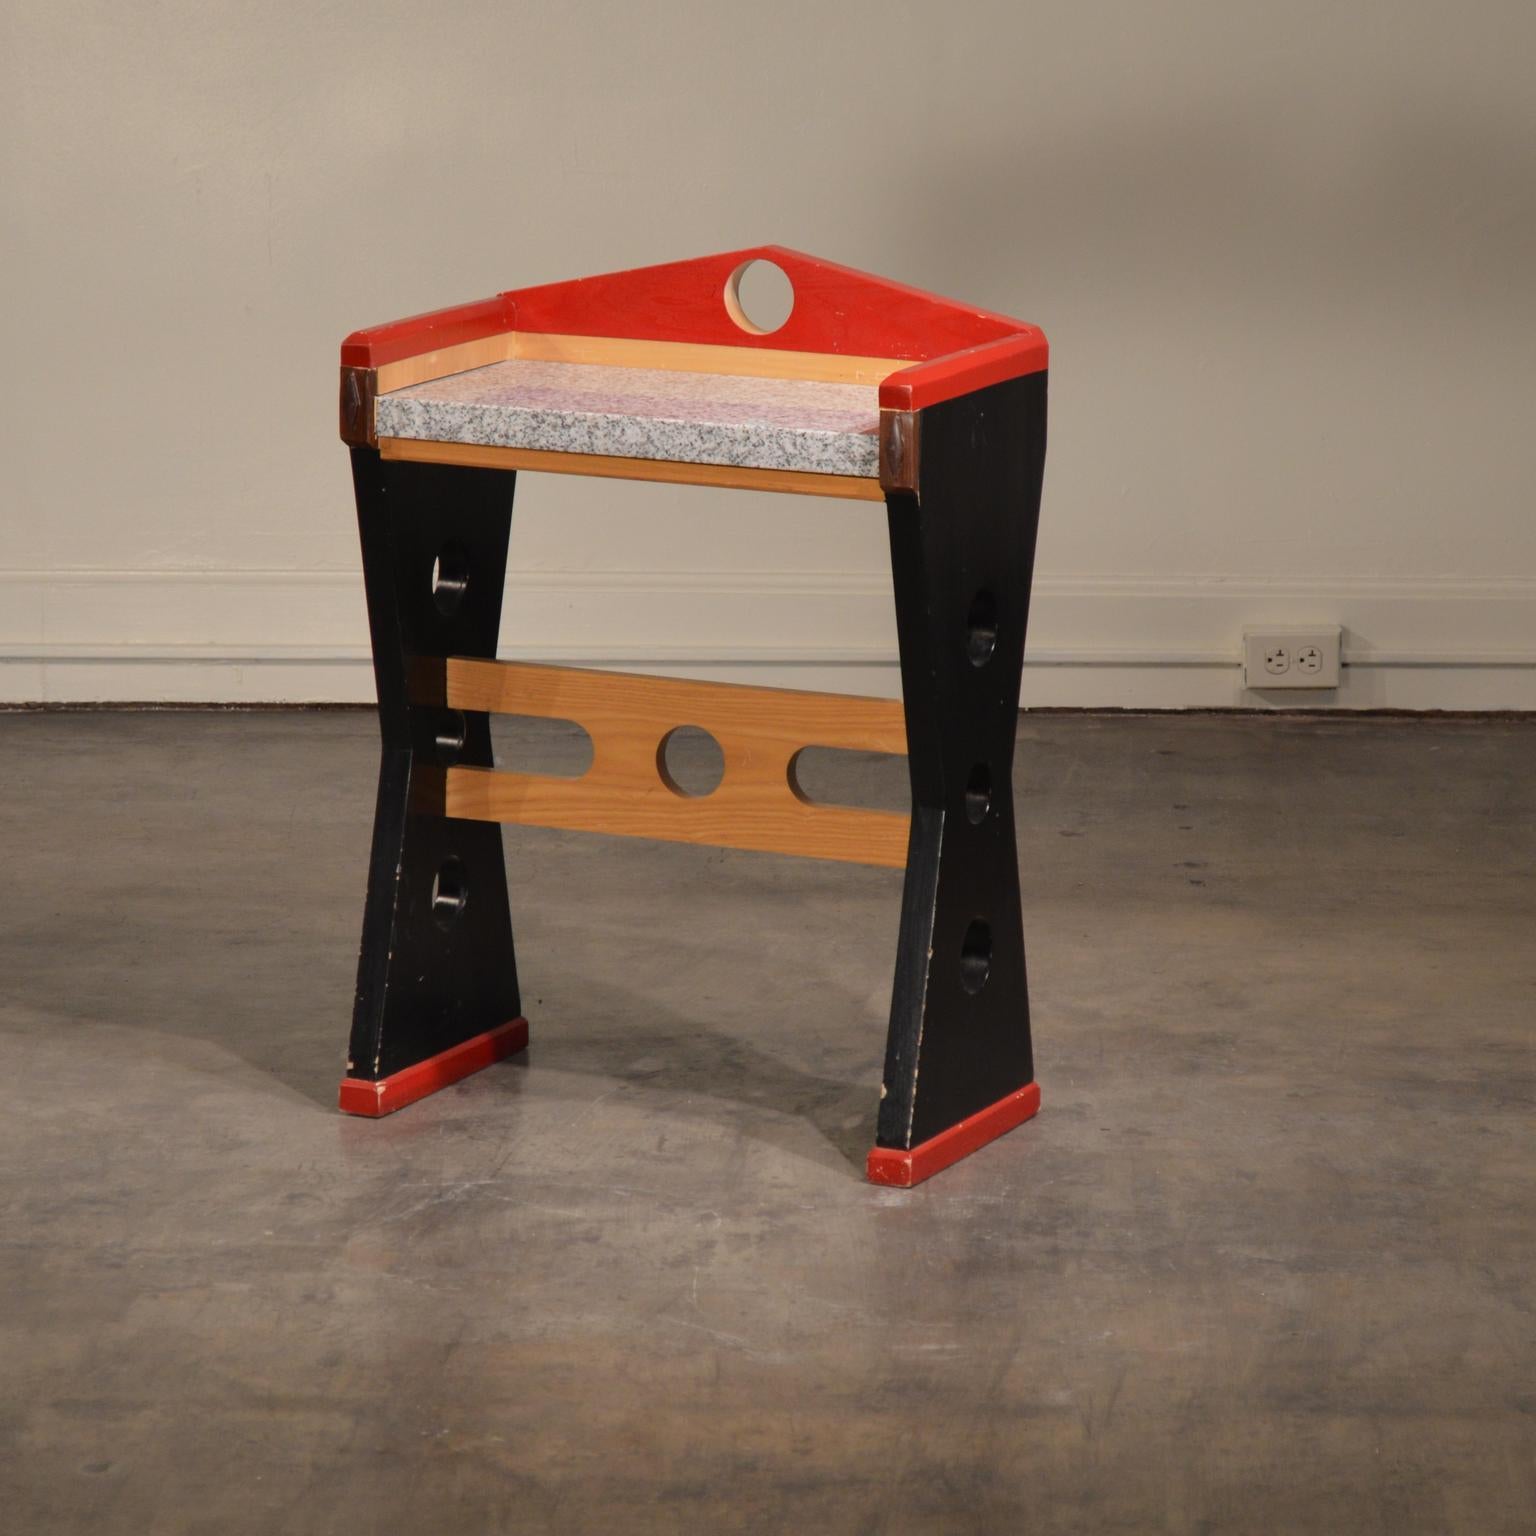 Custom Designed Memphis style console table made of painted wood and granite. This sturdy and stunning Postmodern design would work well in a small entrance way or even as a child's desk. This custom piece came from a Malibu estate designed in